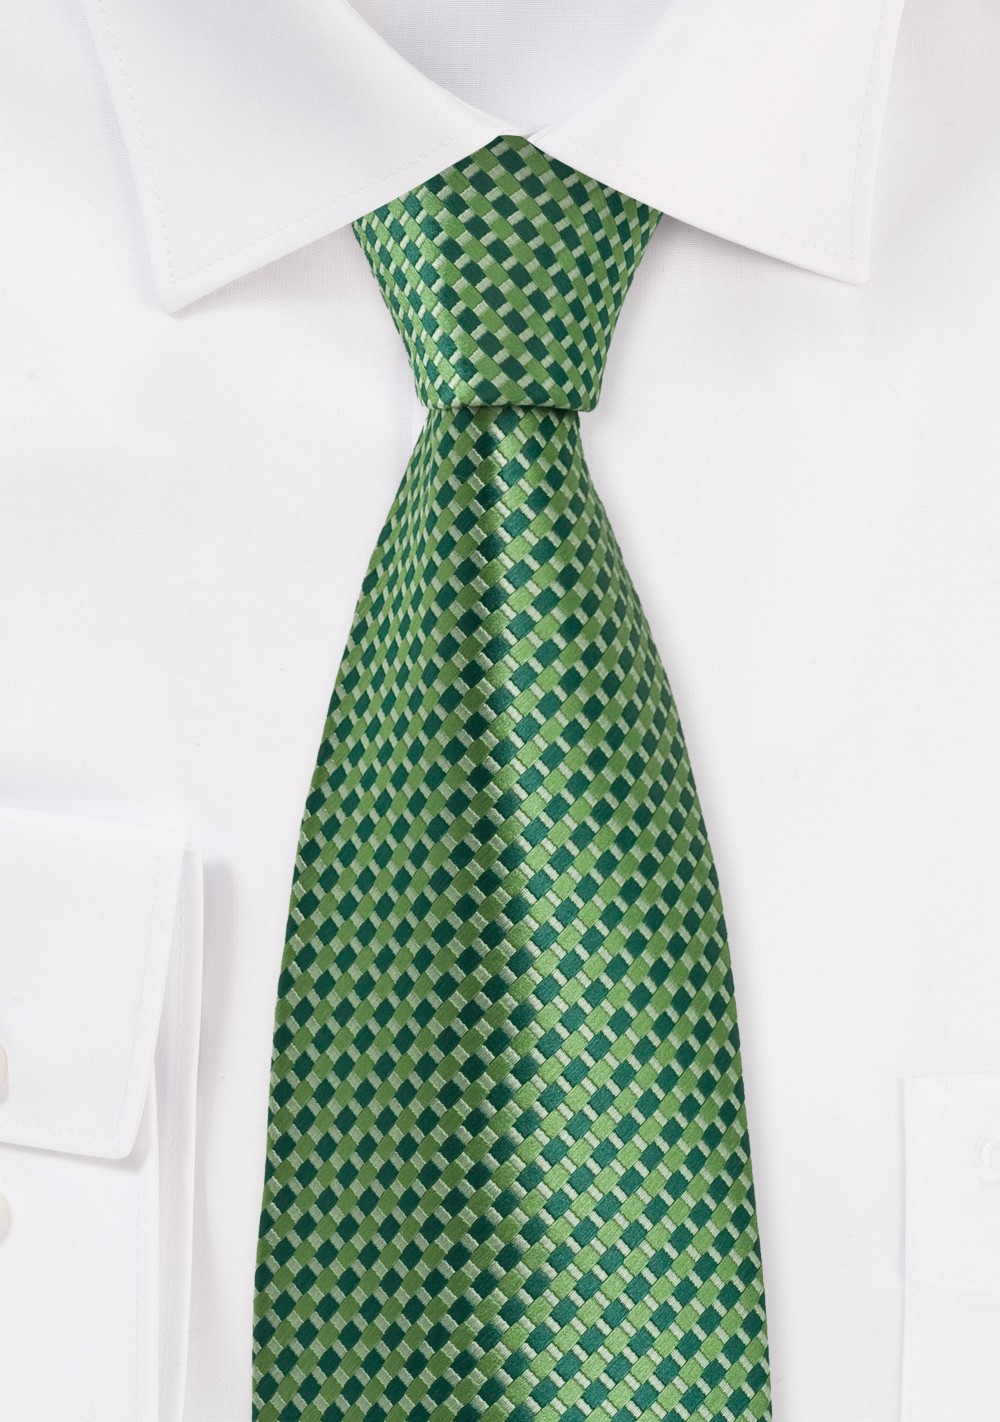 Bright Green Patterned Tie